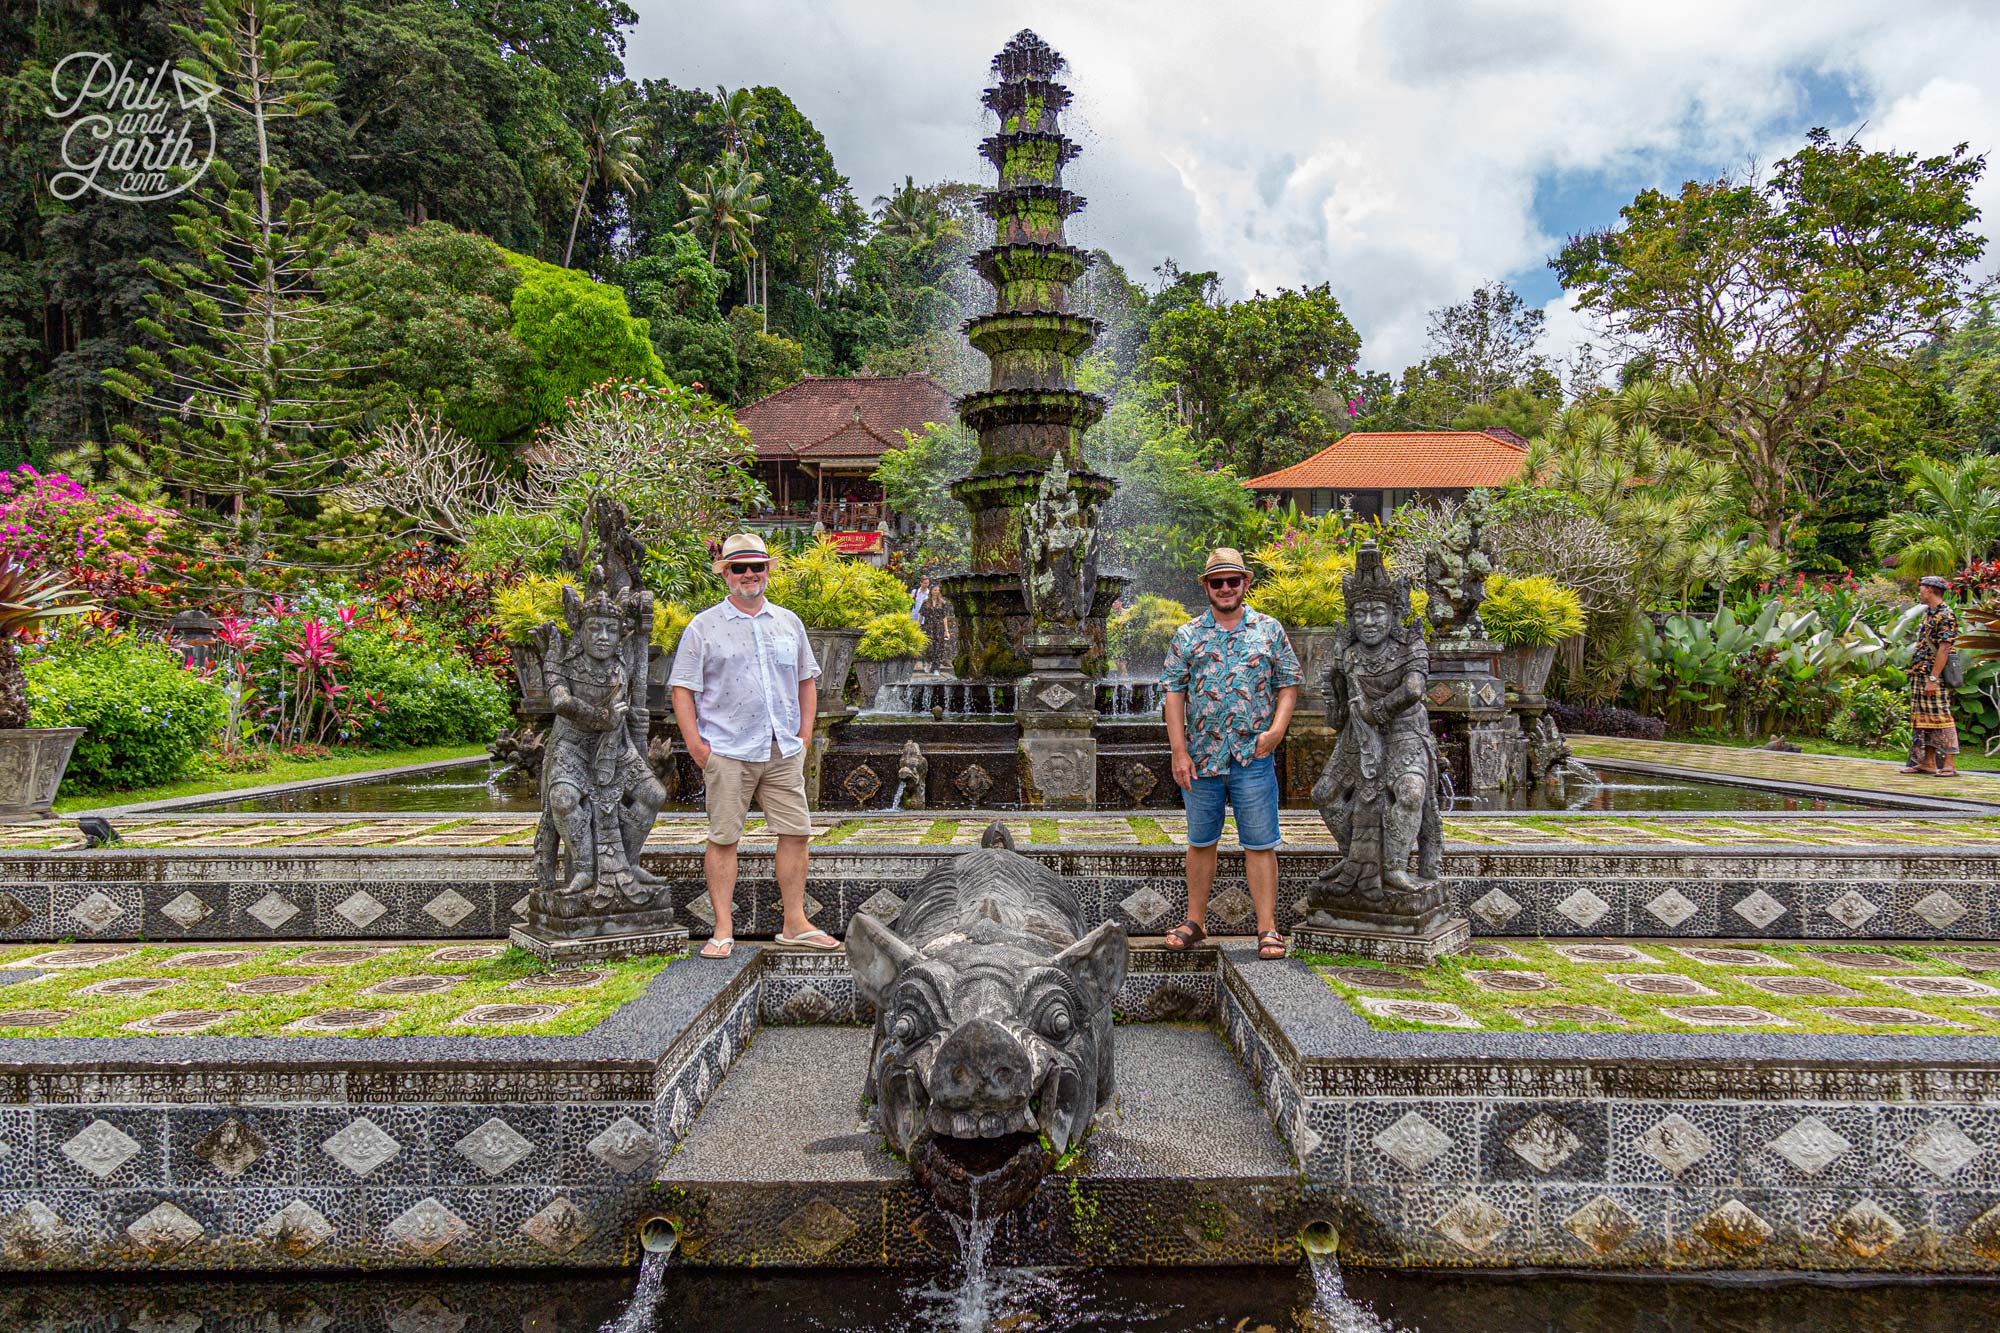 The Tirta Gangga Water Palace on the East of the island is beautiful